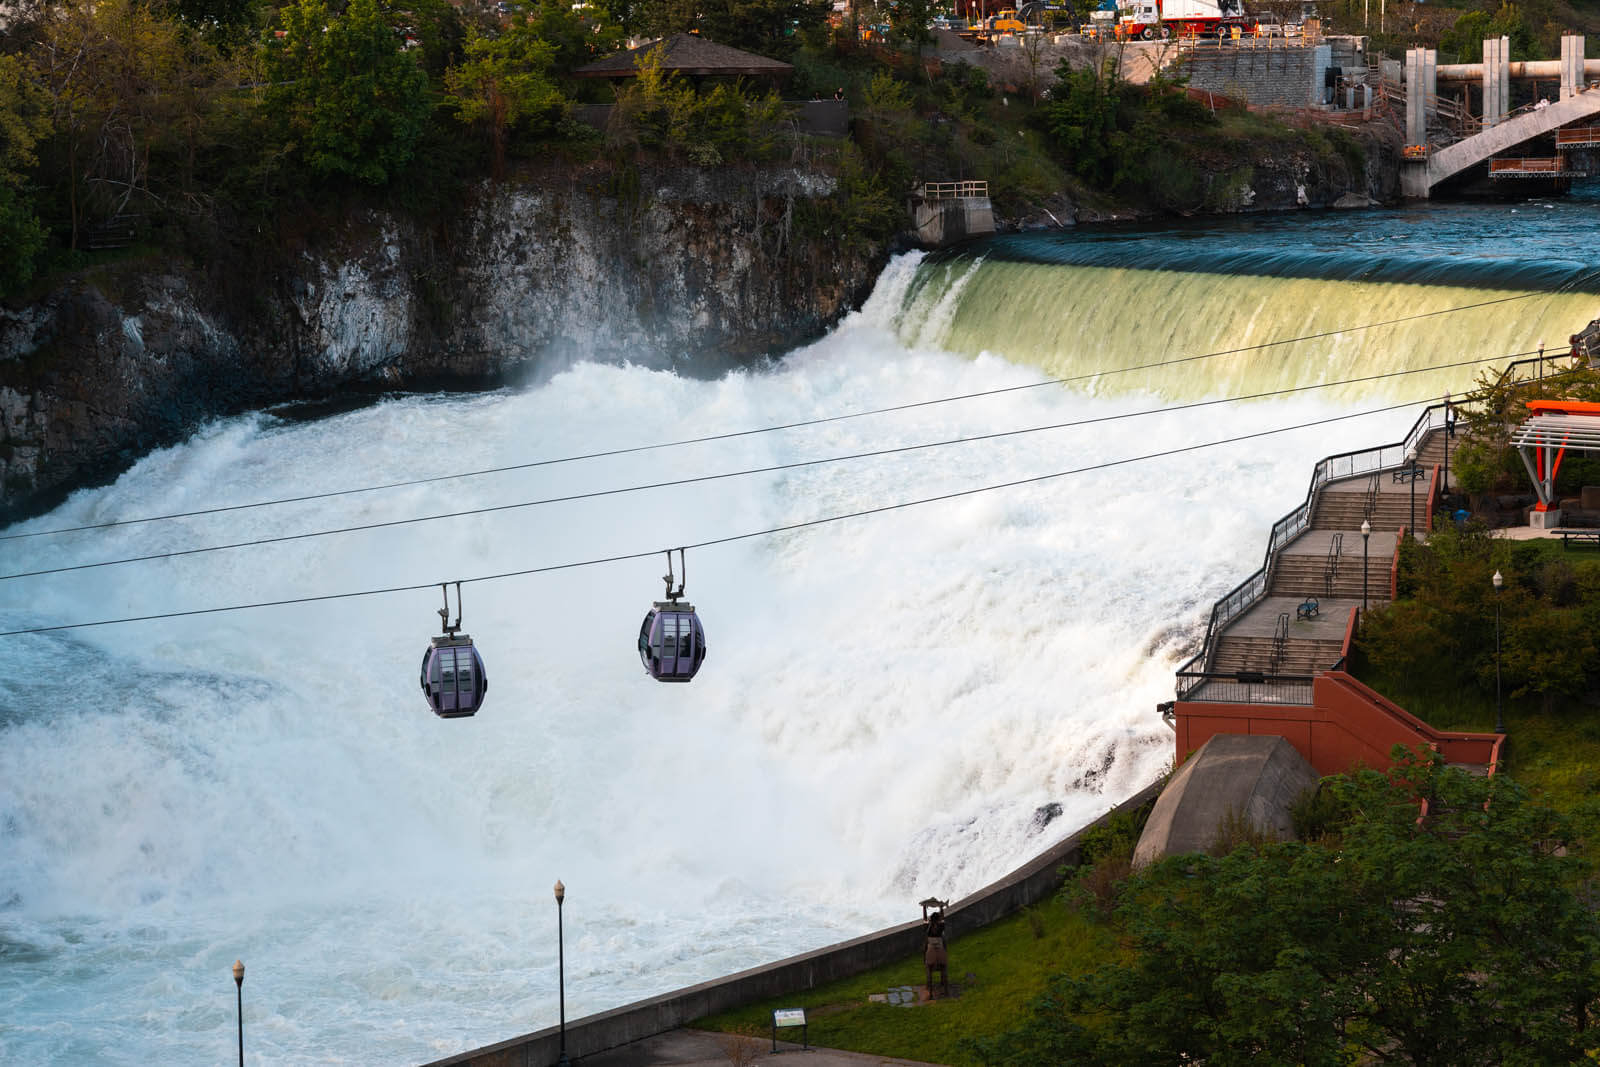 view of the Numerica Skyride over the raging Spokane Falls in Washington